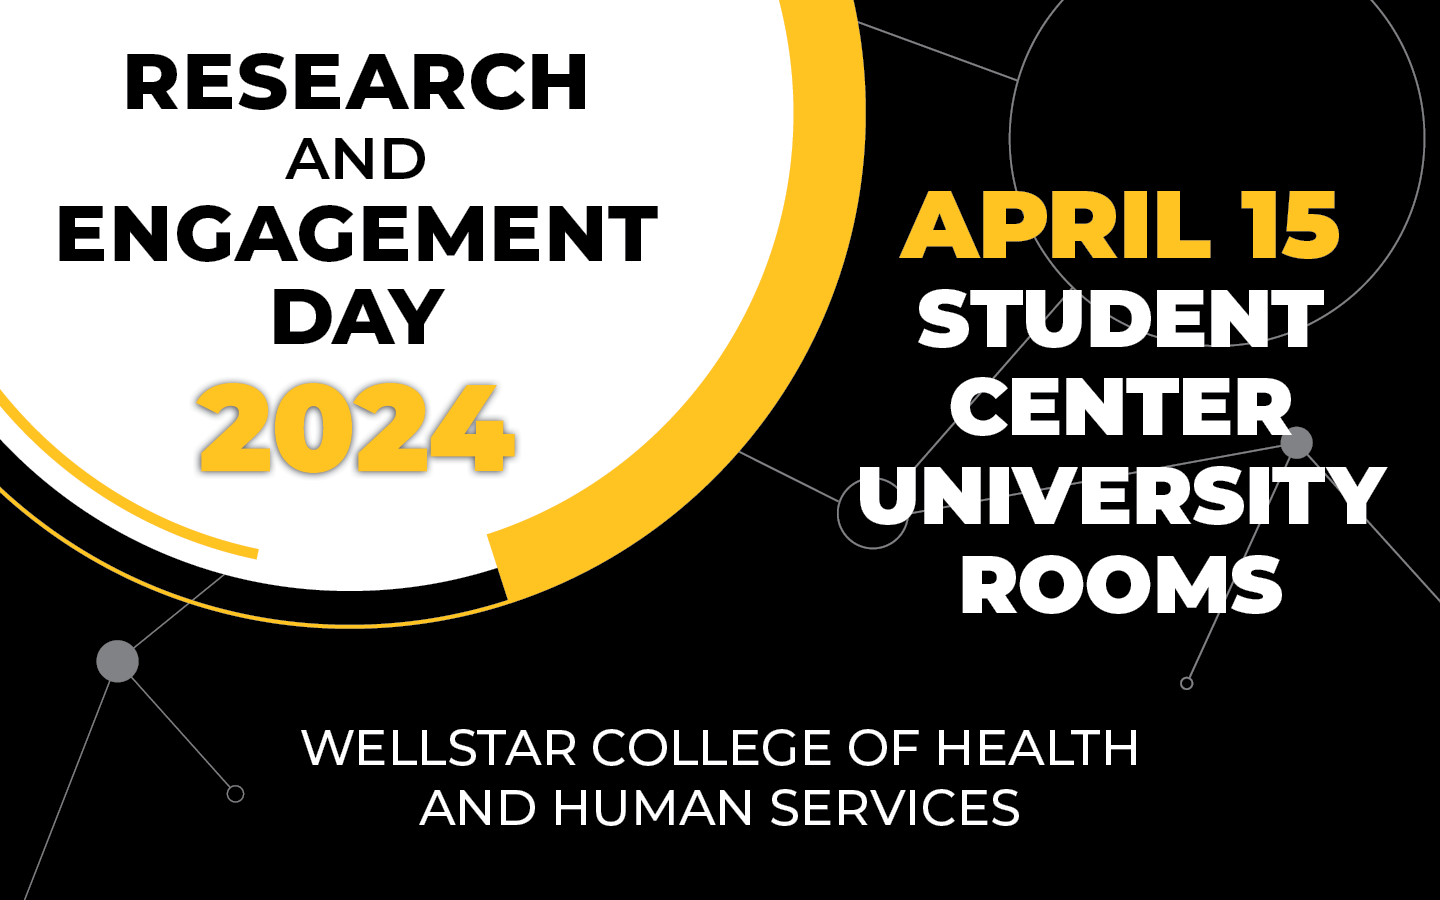 research and engagement day 2024 april 15 student center university rooms